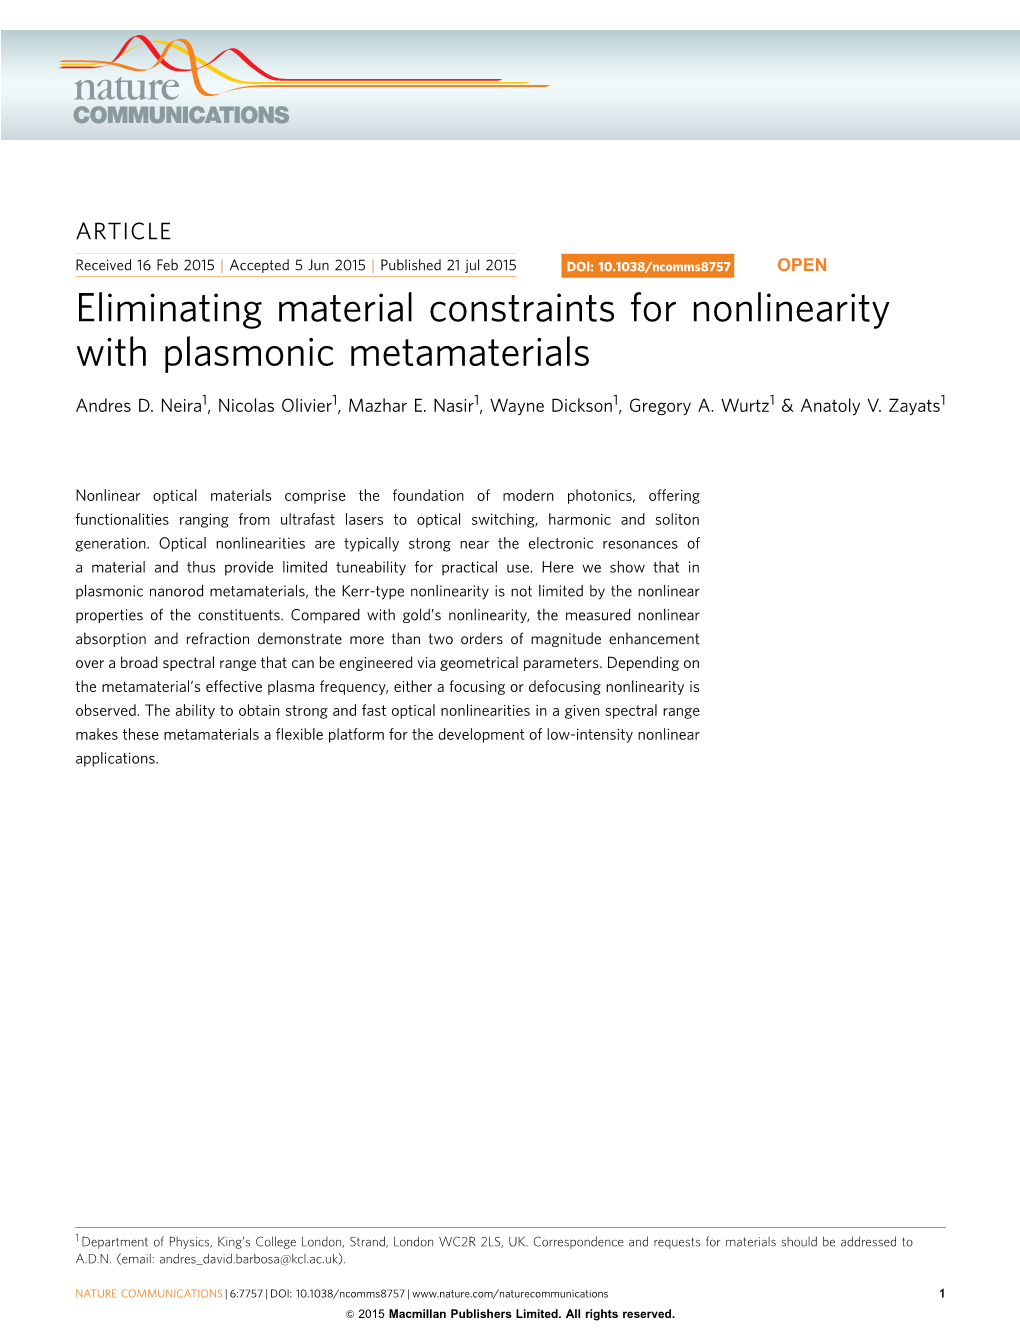 Eliminating Material Constraints for Nonlinearity with Plasmonic Metamaterials